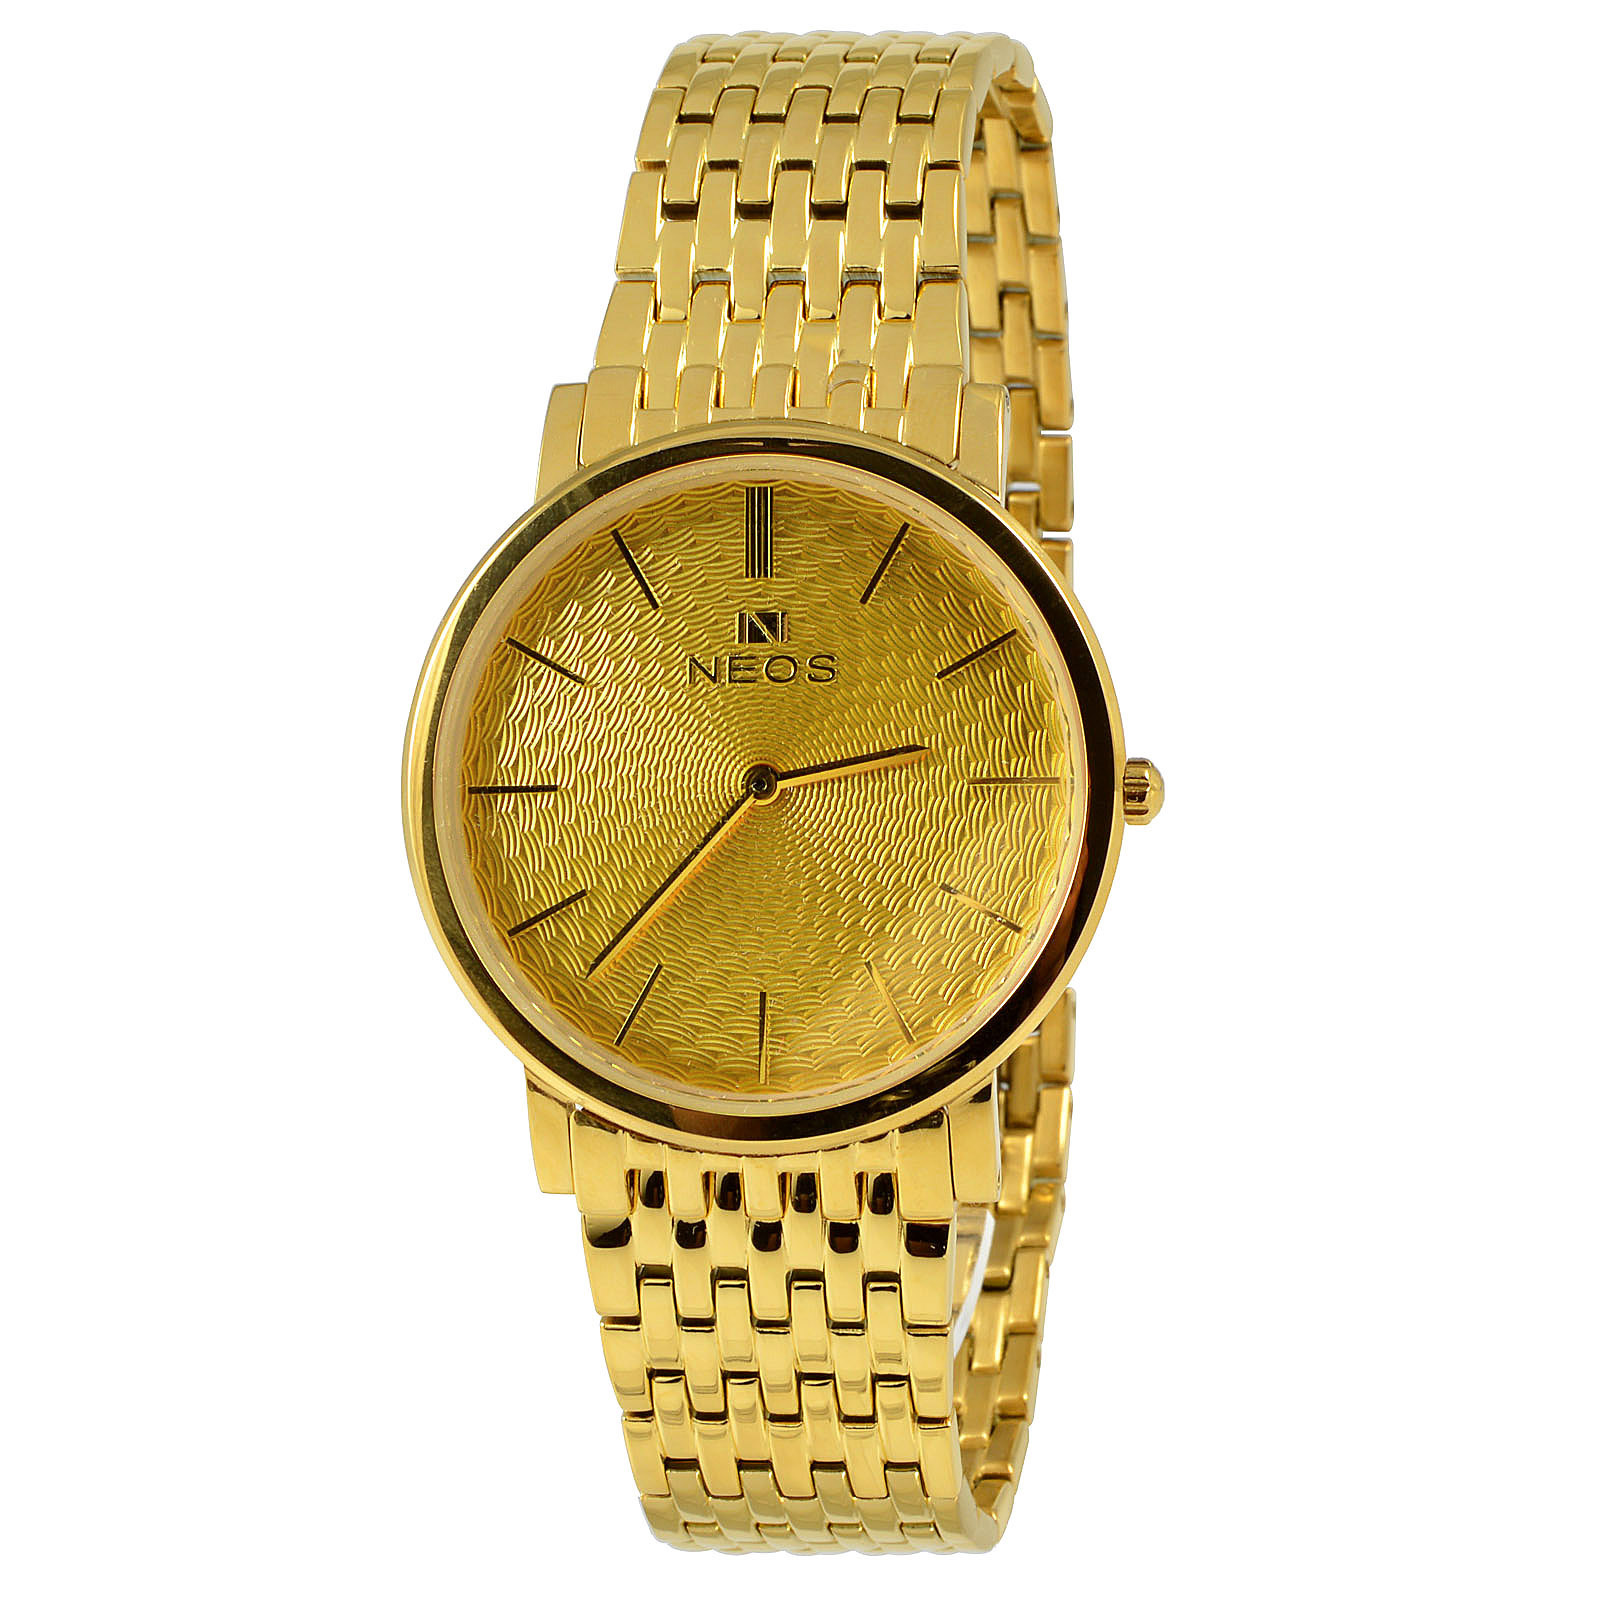 Oxcia Golden Analog Watch for Men